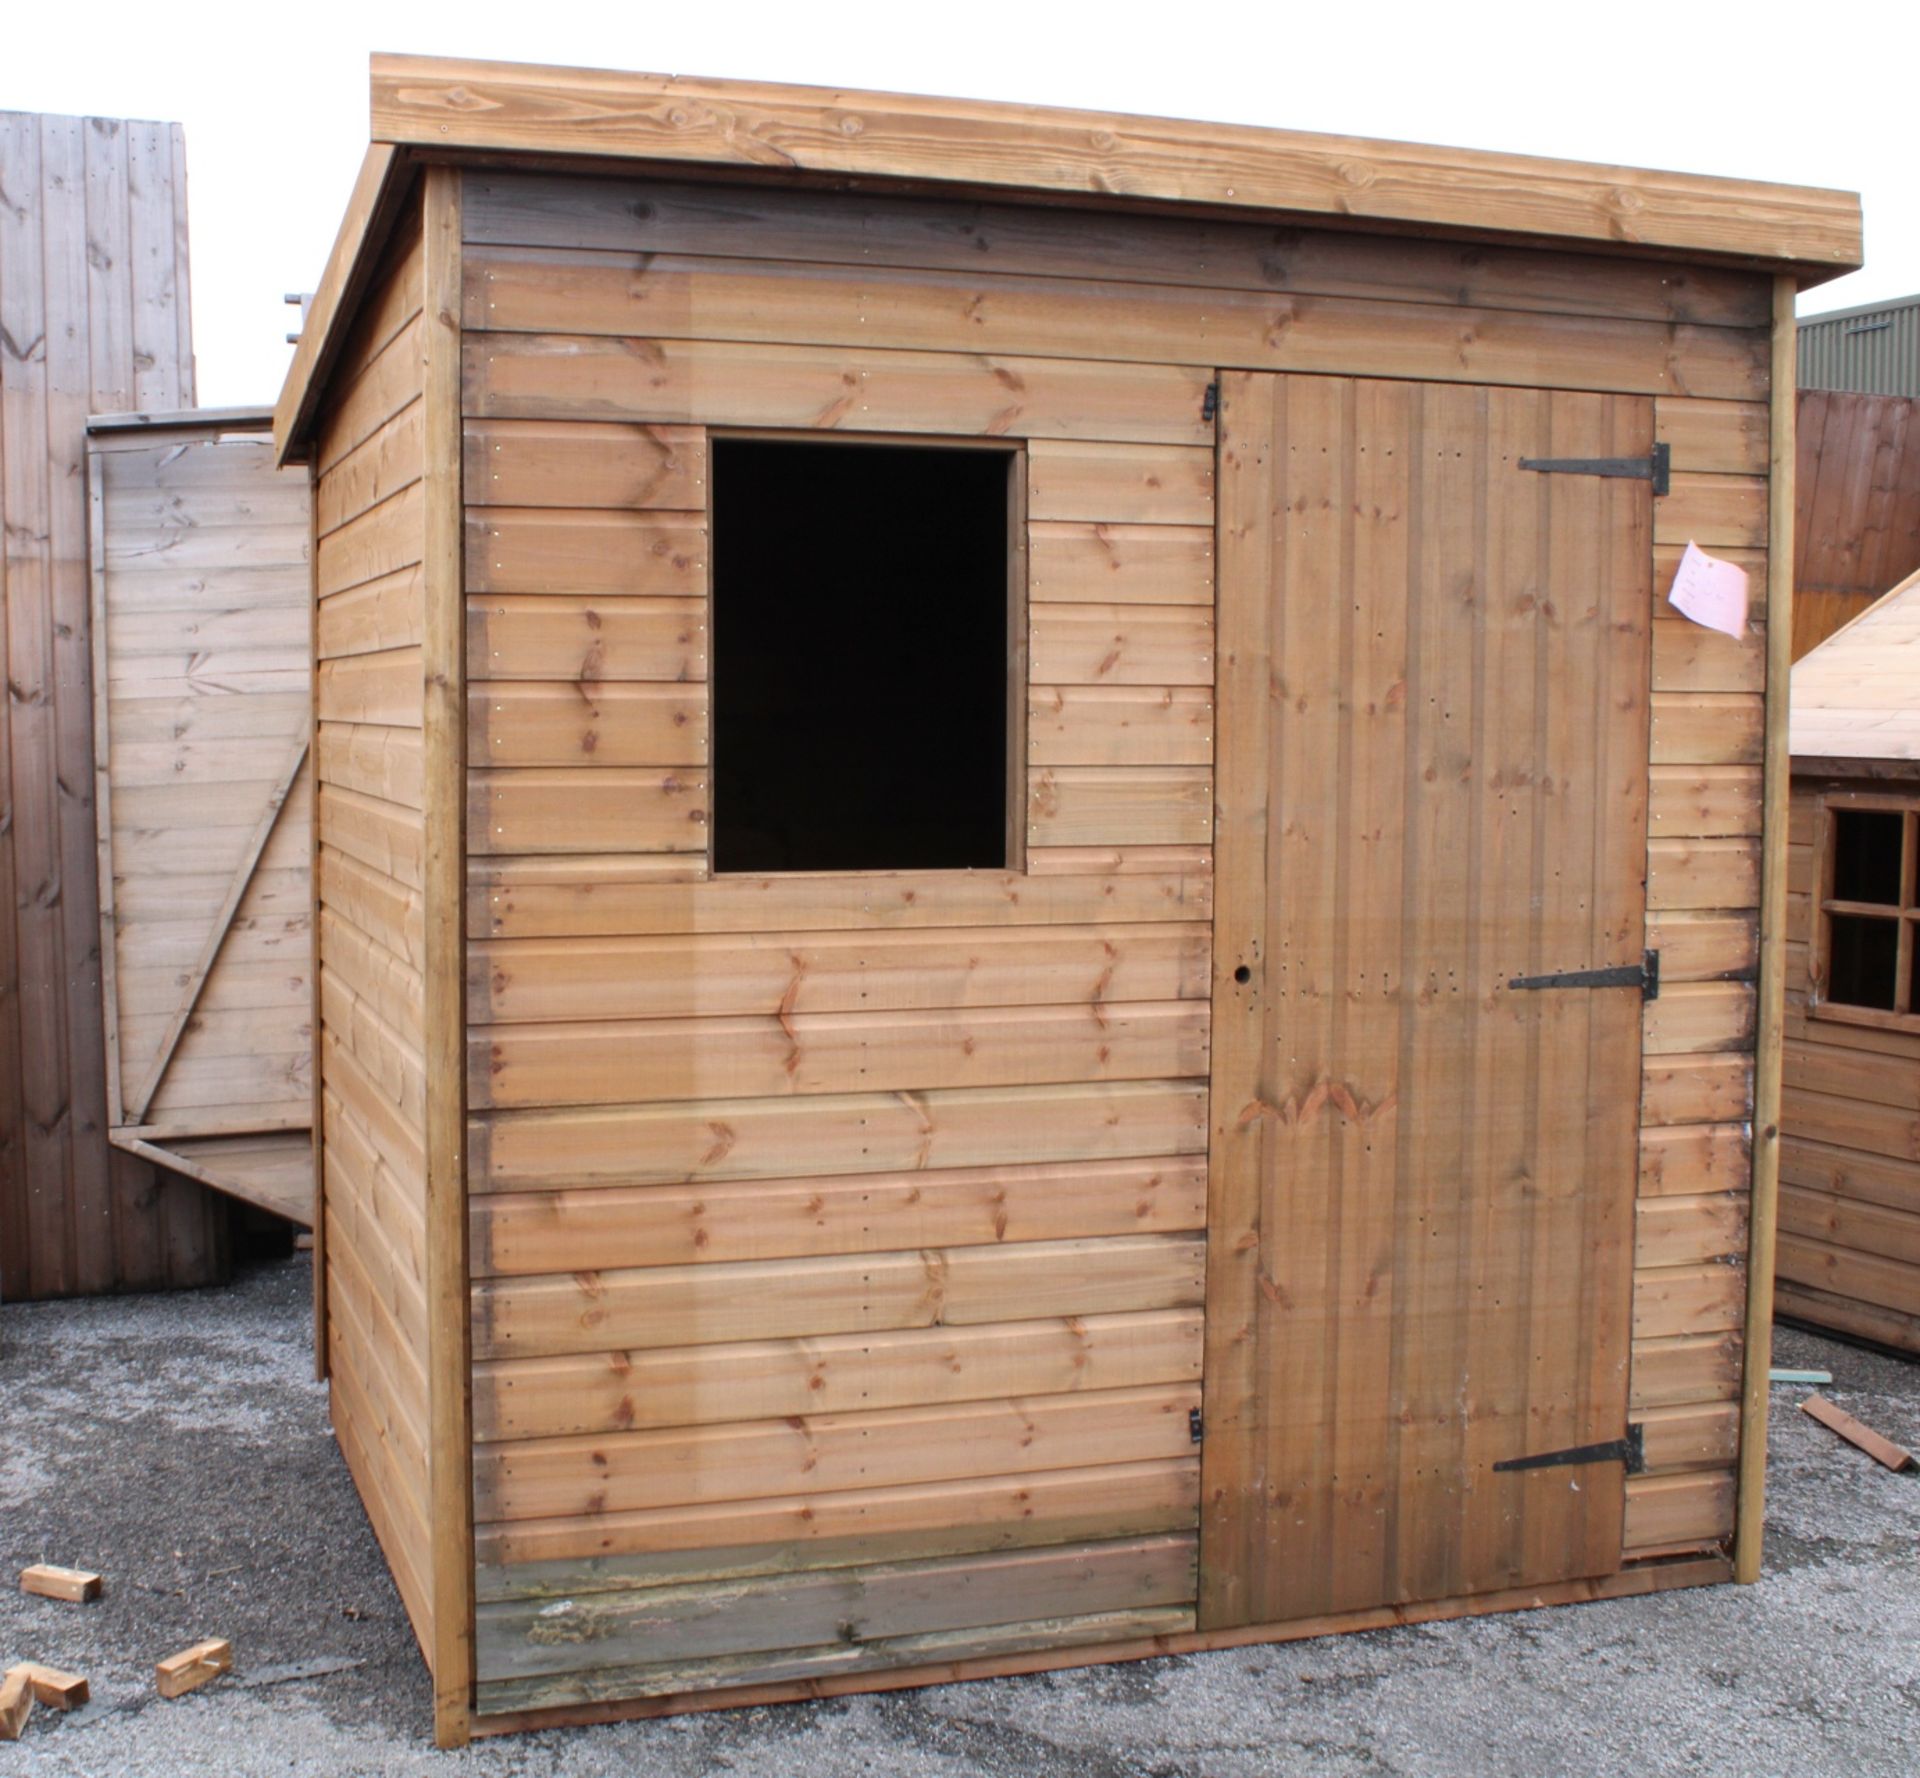 14 9/8 7x5 superior height pent shed, Standard 16mm Nominal Cladding £ RRP960 - Image 2 of 3